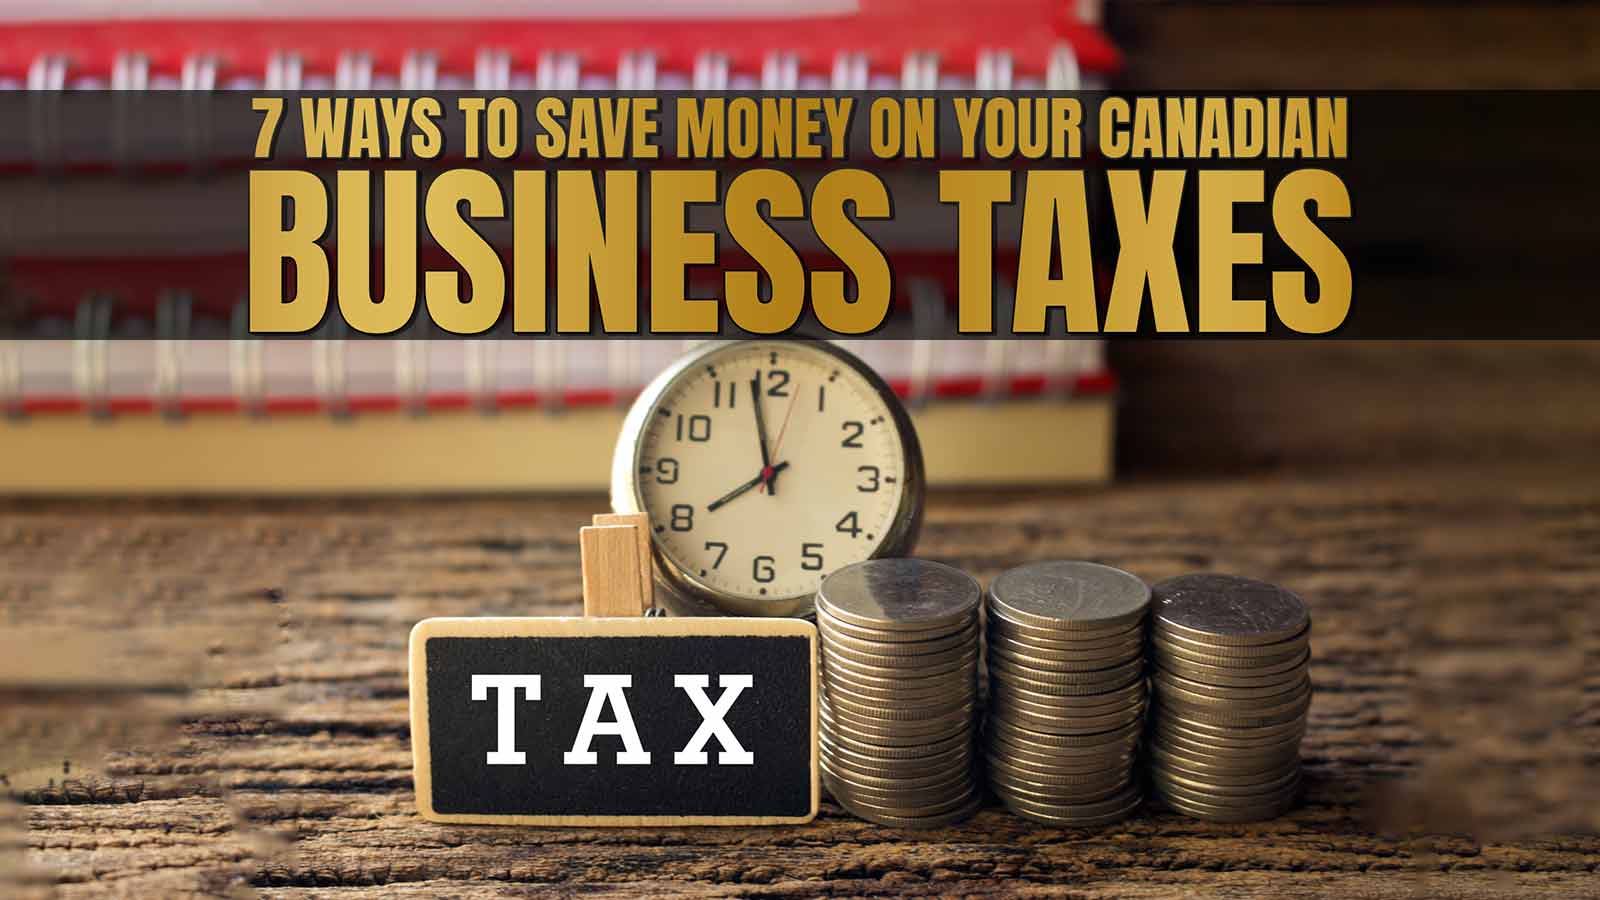 Save Money On Your Canadian Business Taxes